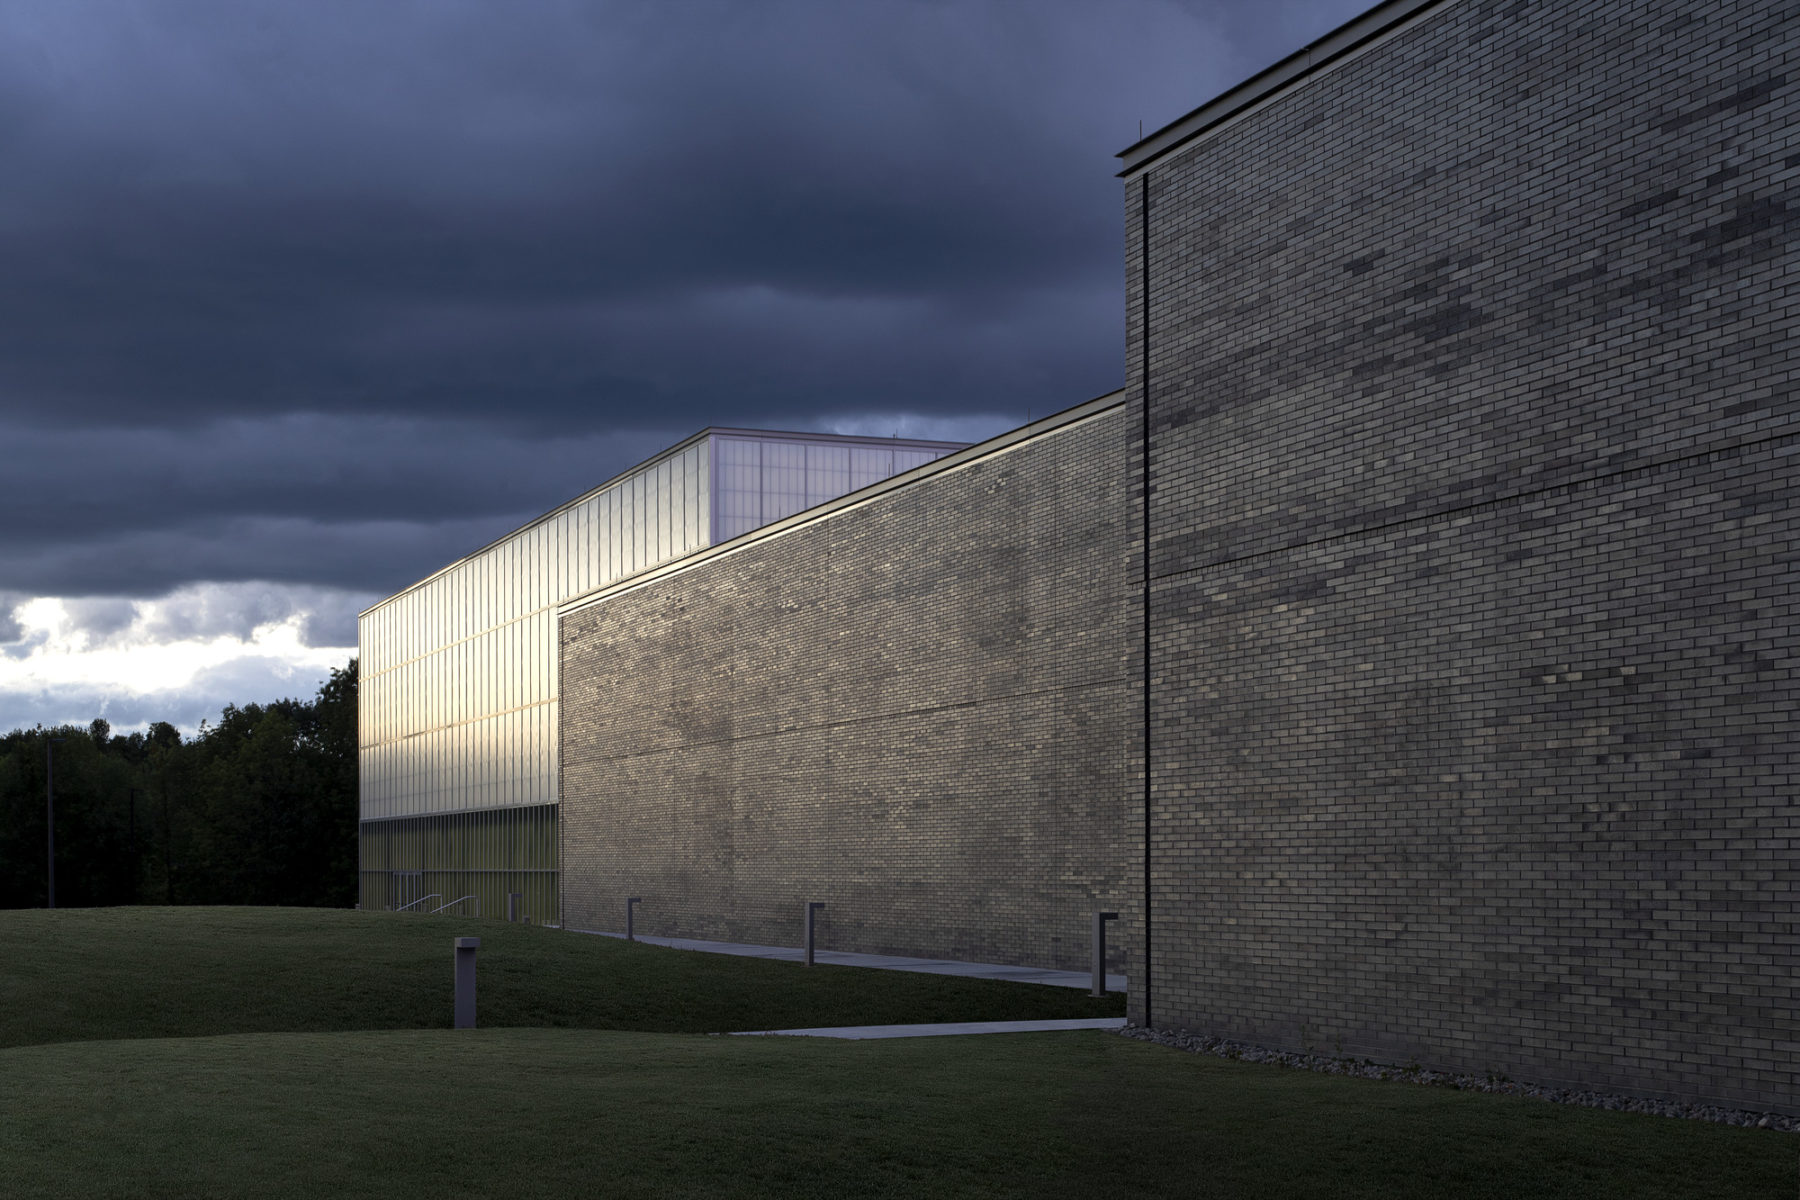 exterior photo of building - volumes of space are expressed in gray brick and curtainwall